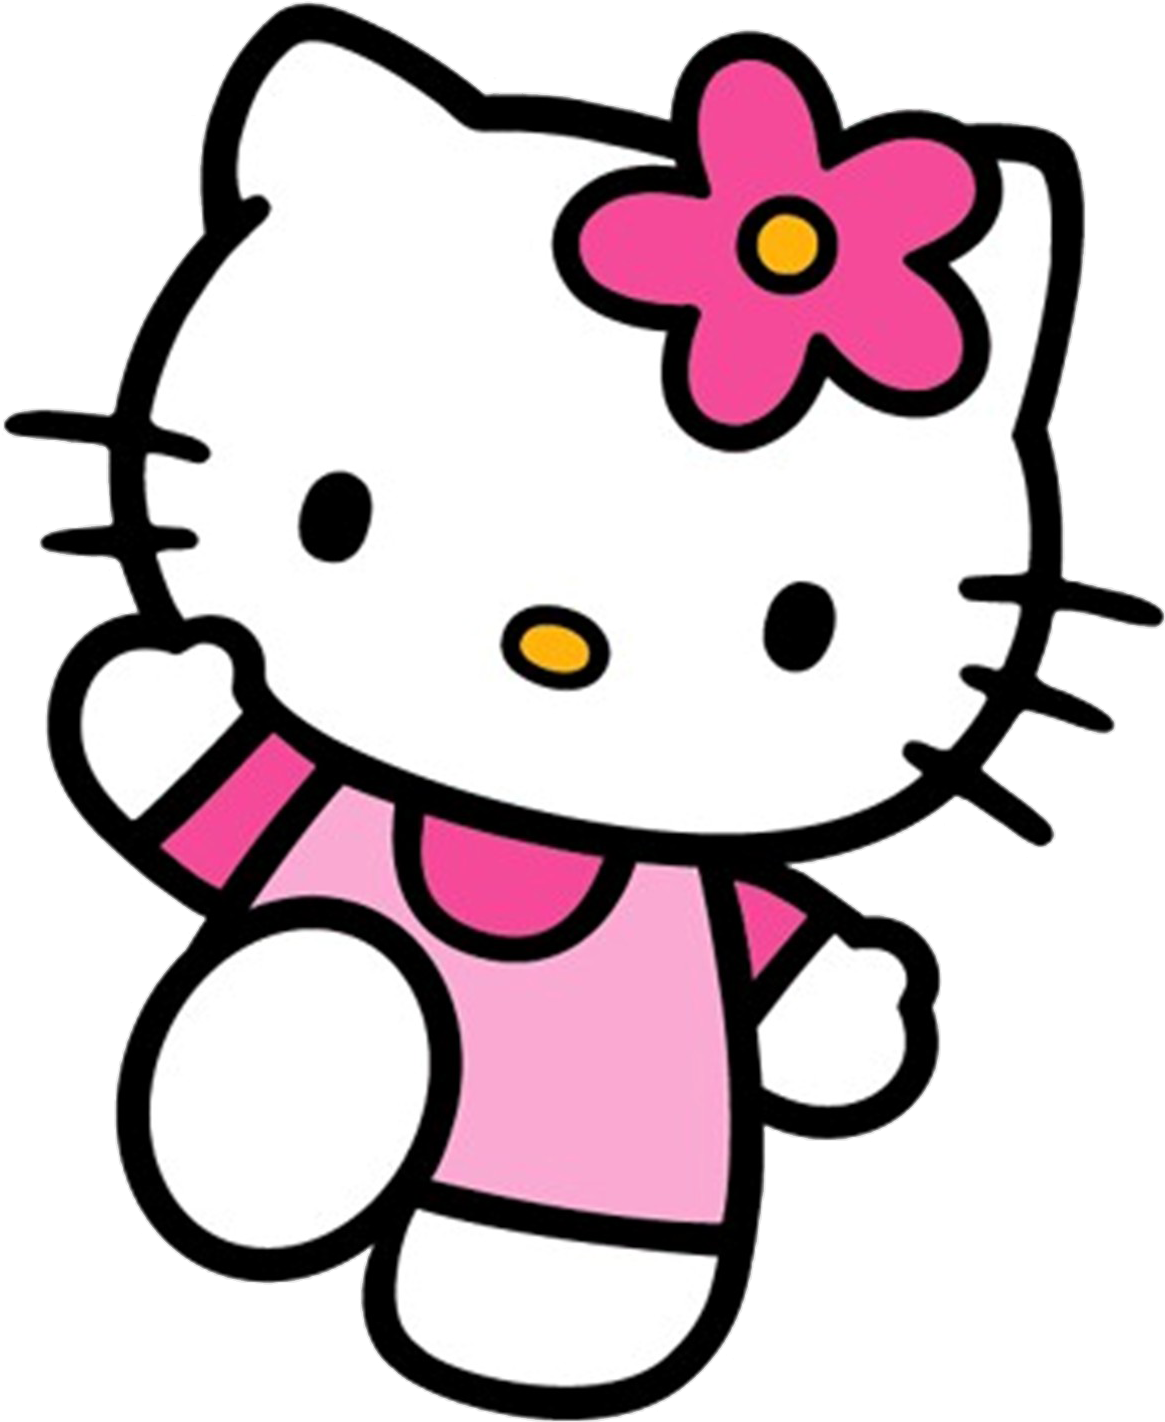 Pink Hello Kitty PNG Image Background